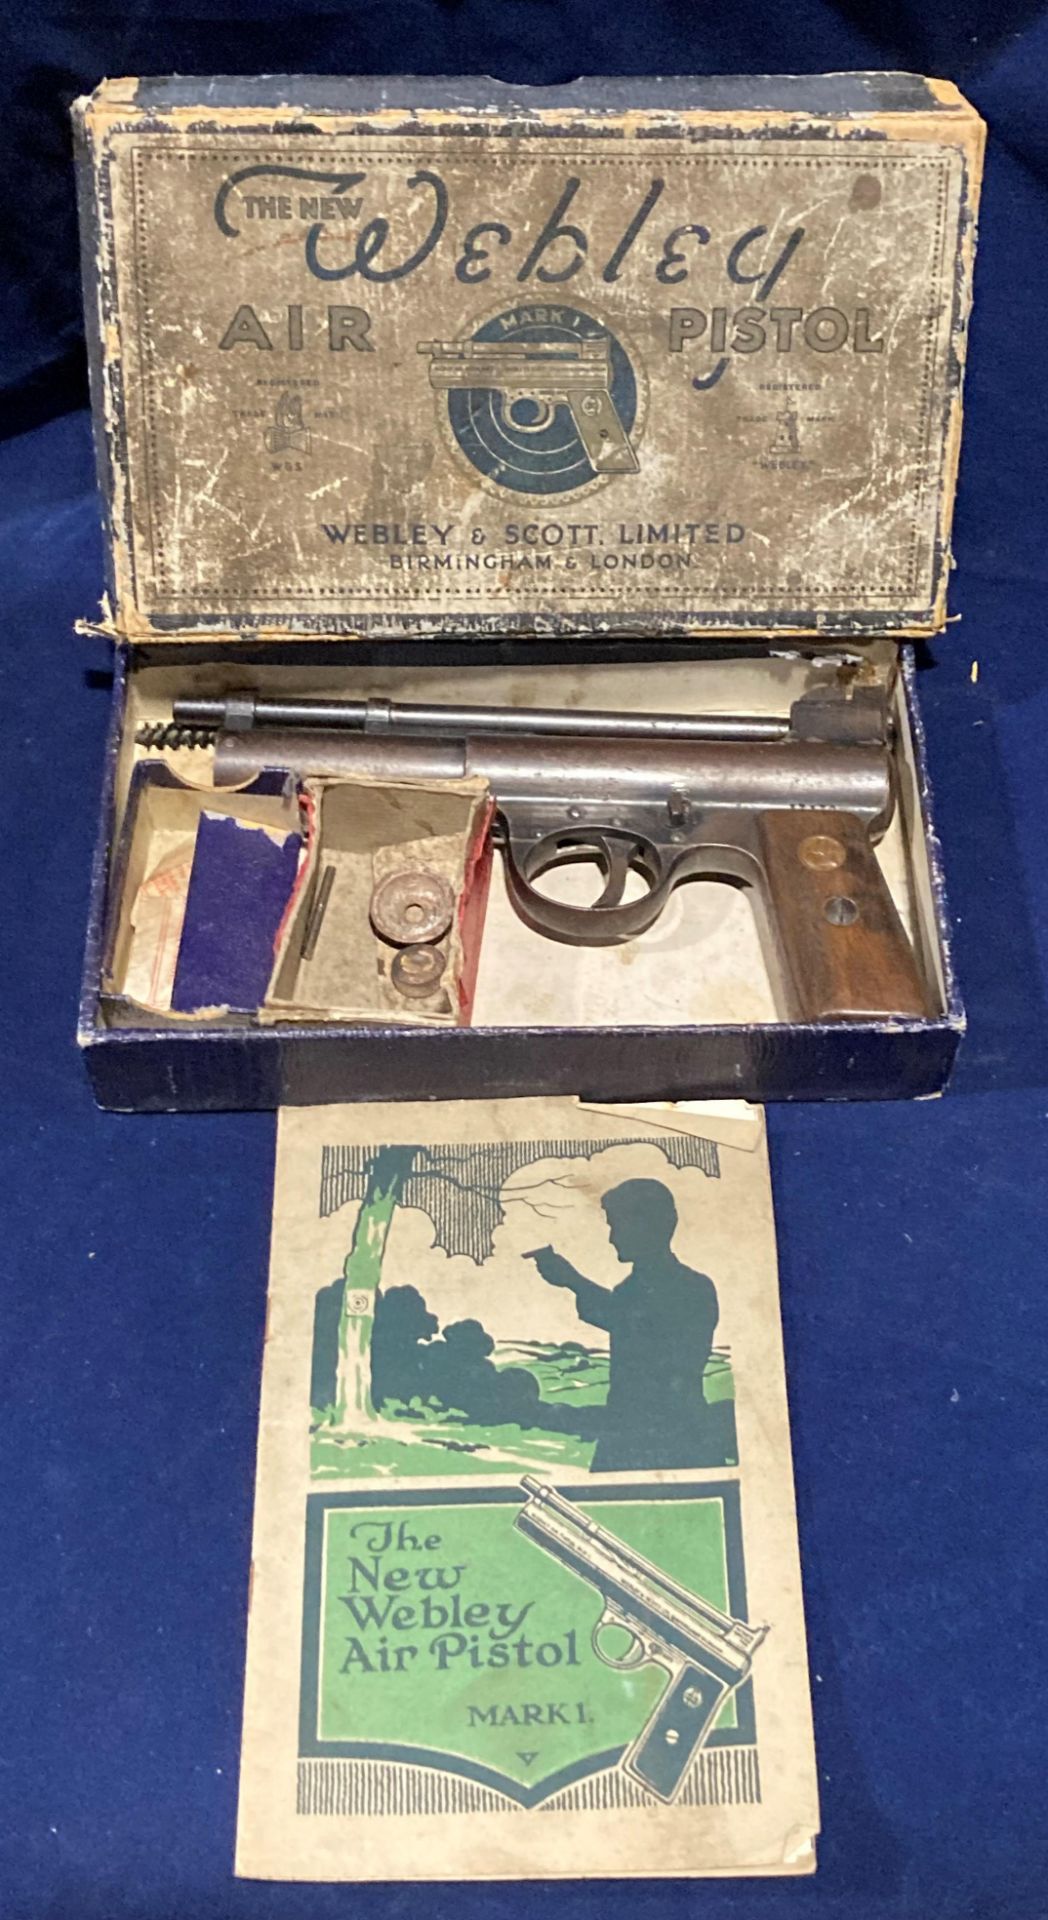 The New Webley Air Pistol Mark 1 complete with manual and box (Saleroom location: S2 counter 3)